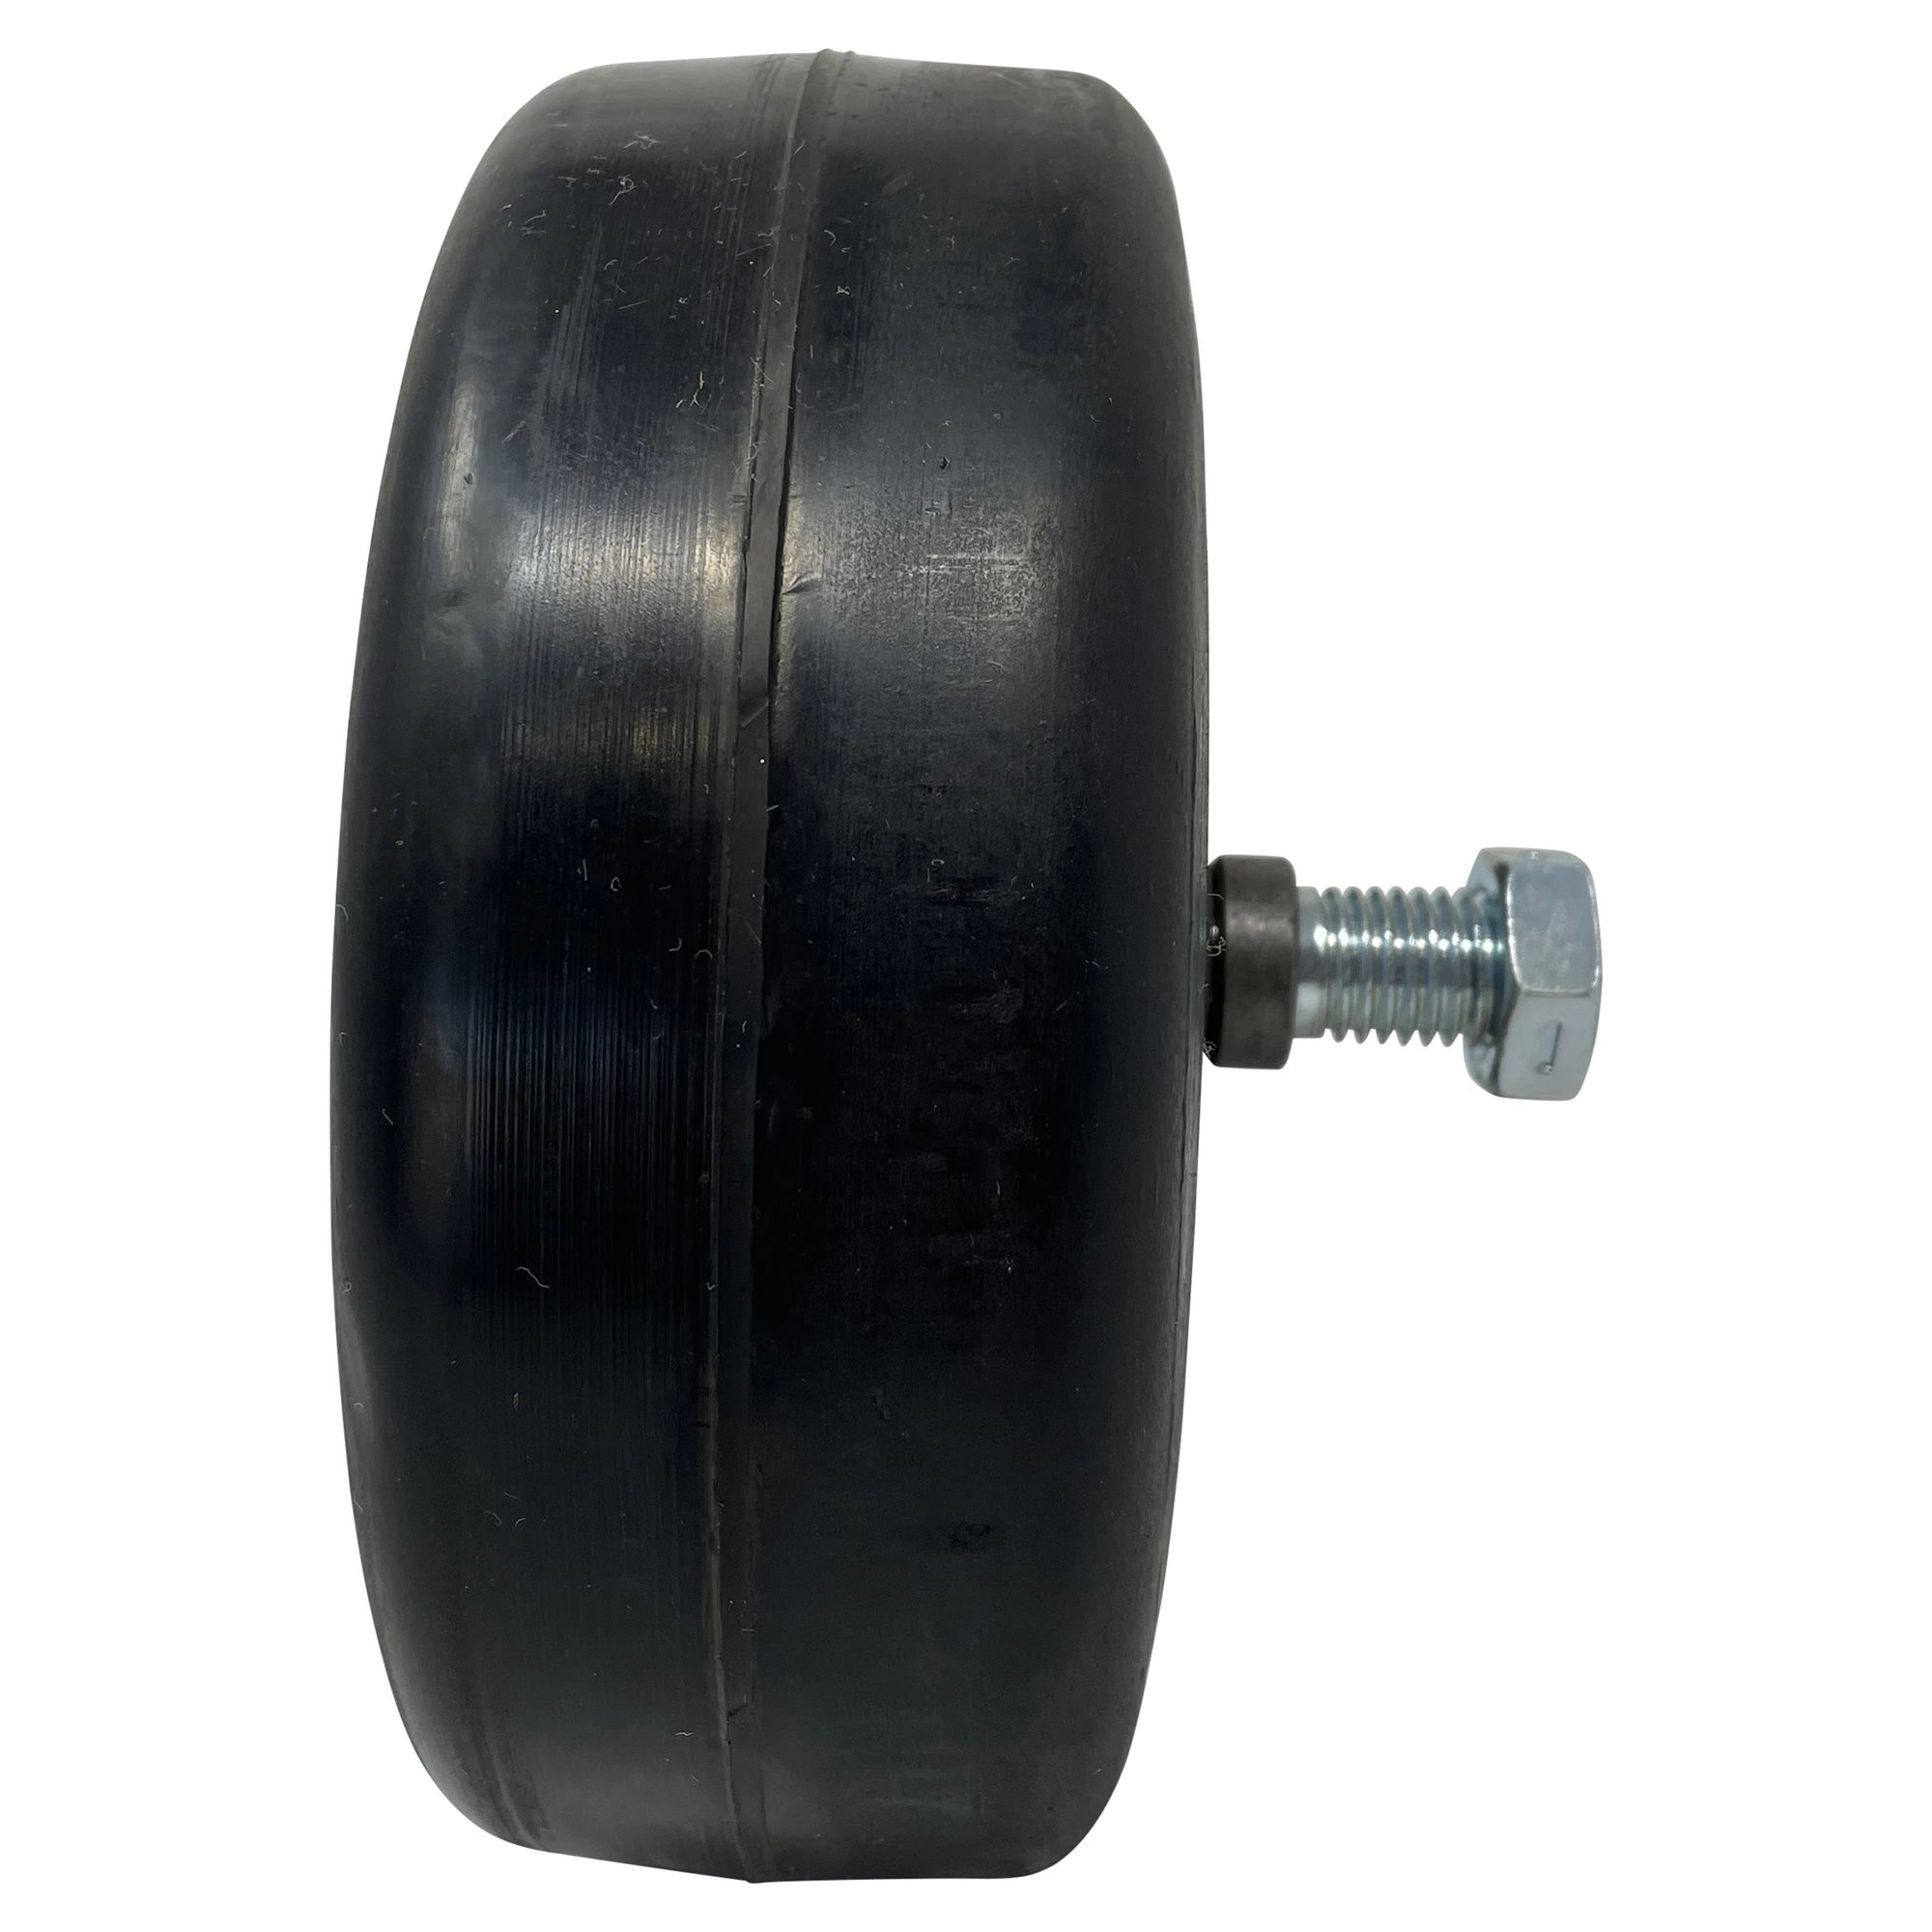 Galbreath™ 8X3 Rubber XHD Wheel - Axle Only